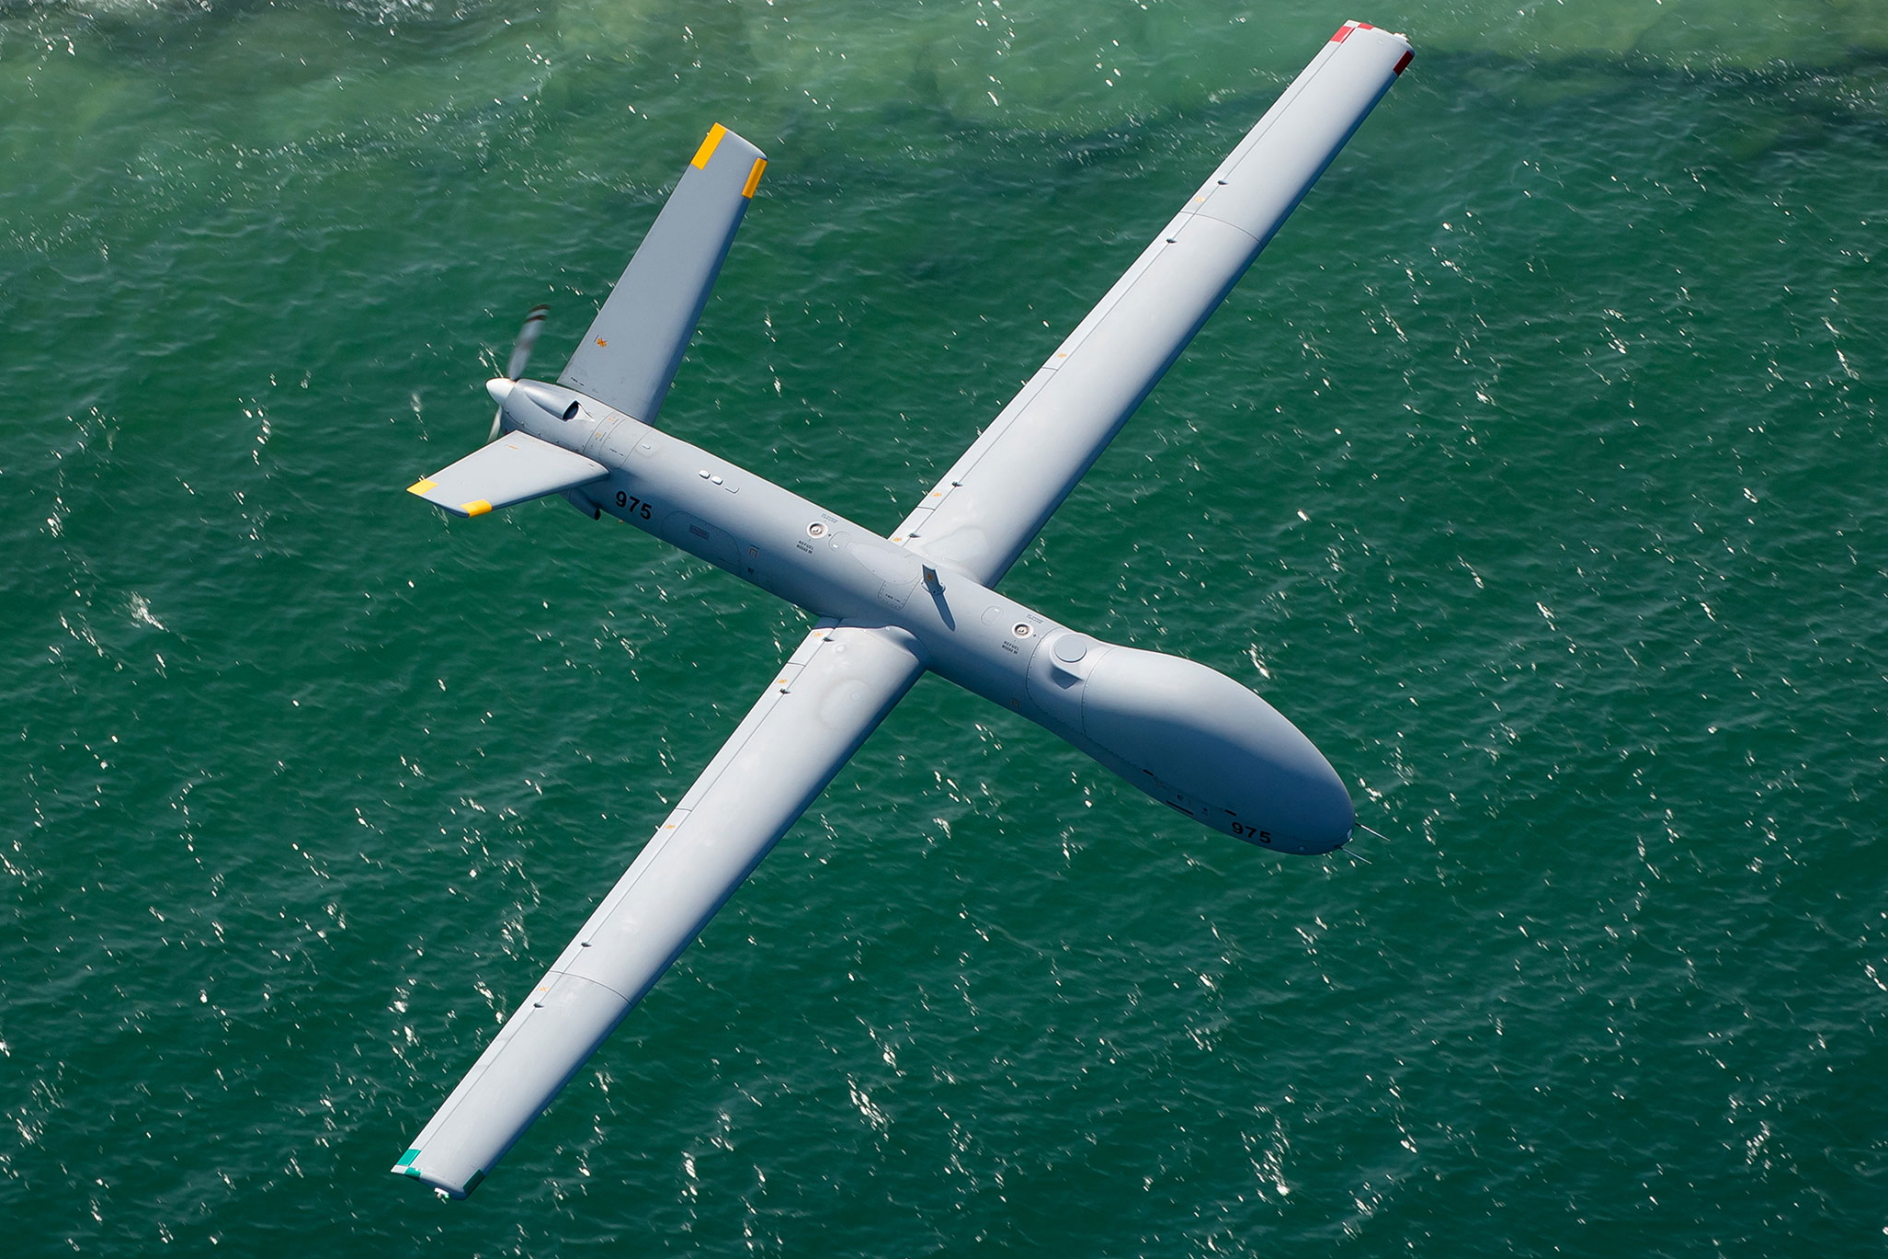 Hermes 900 Maritime Unmanned Aircraft. Click to enlarge.